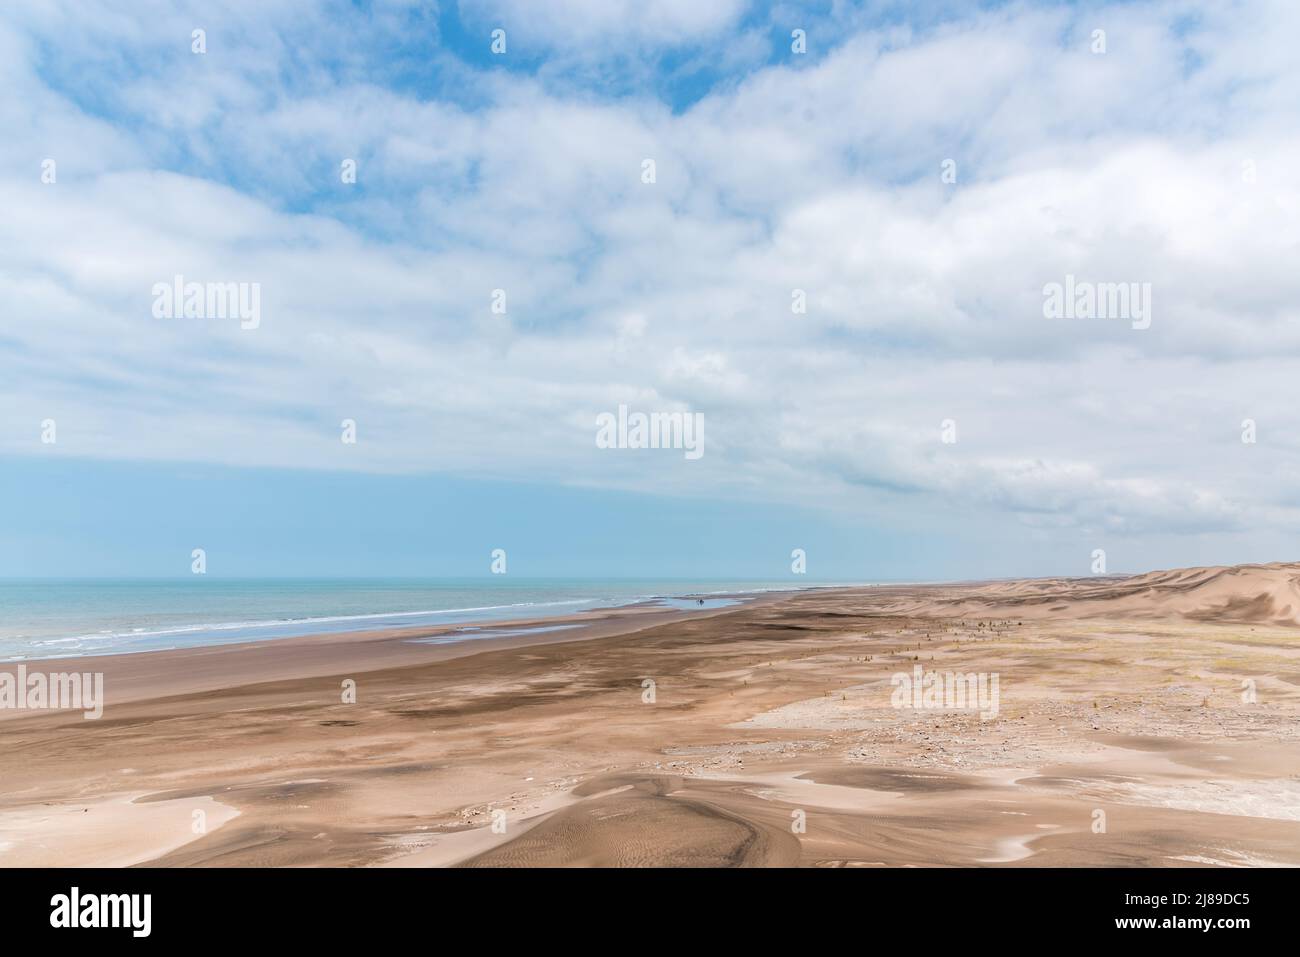 Panoramic photo of the sandy dunes of a desert in front of the sea Stock Photo